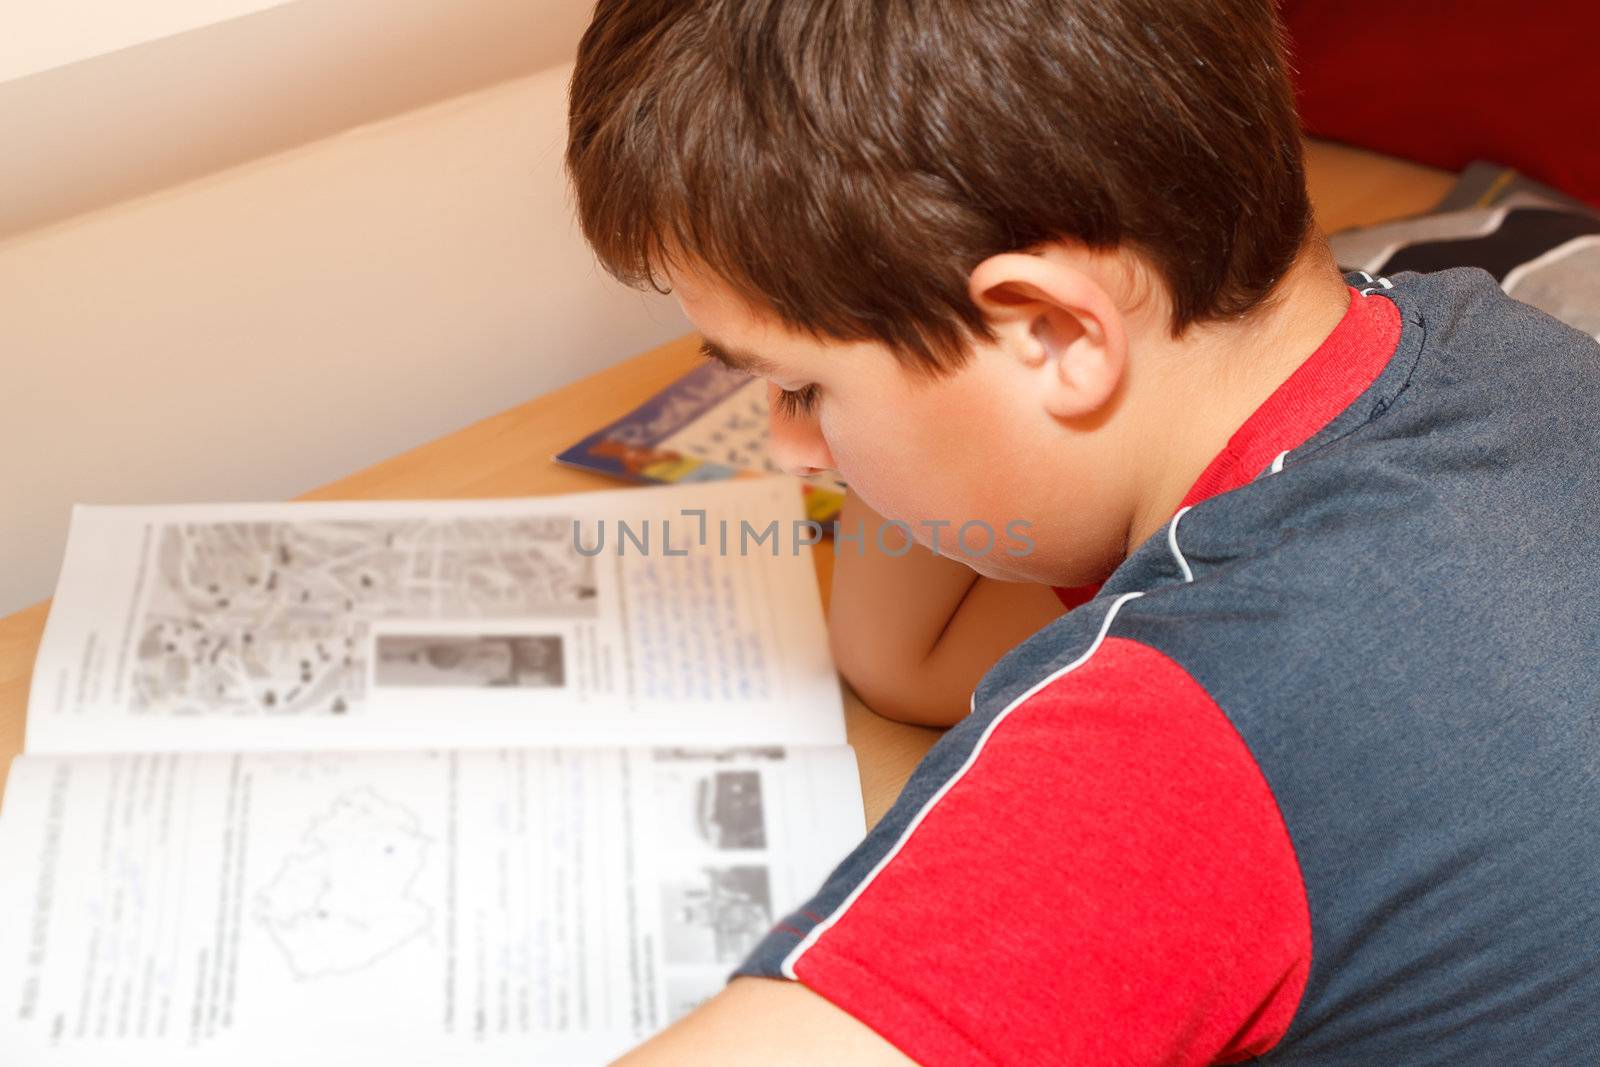 boy doing homework, reading text from workbook by artush